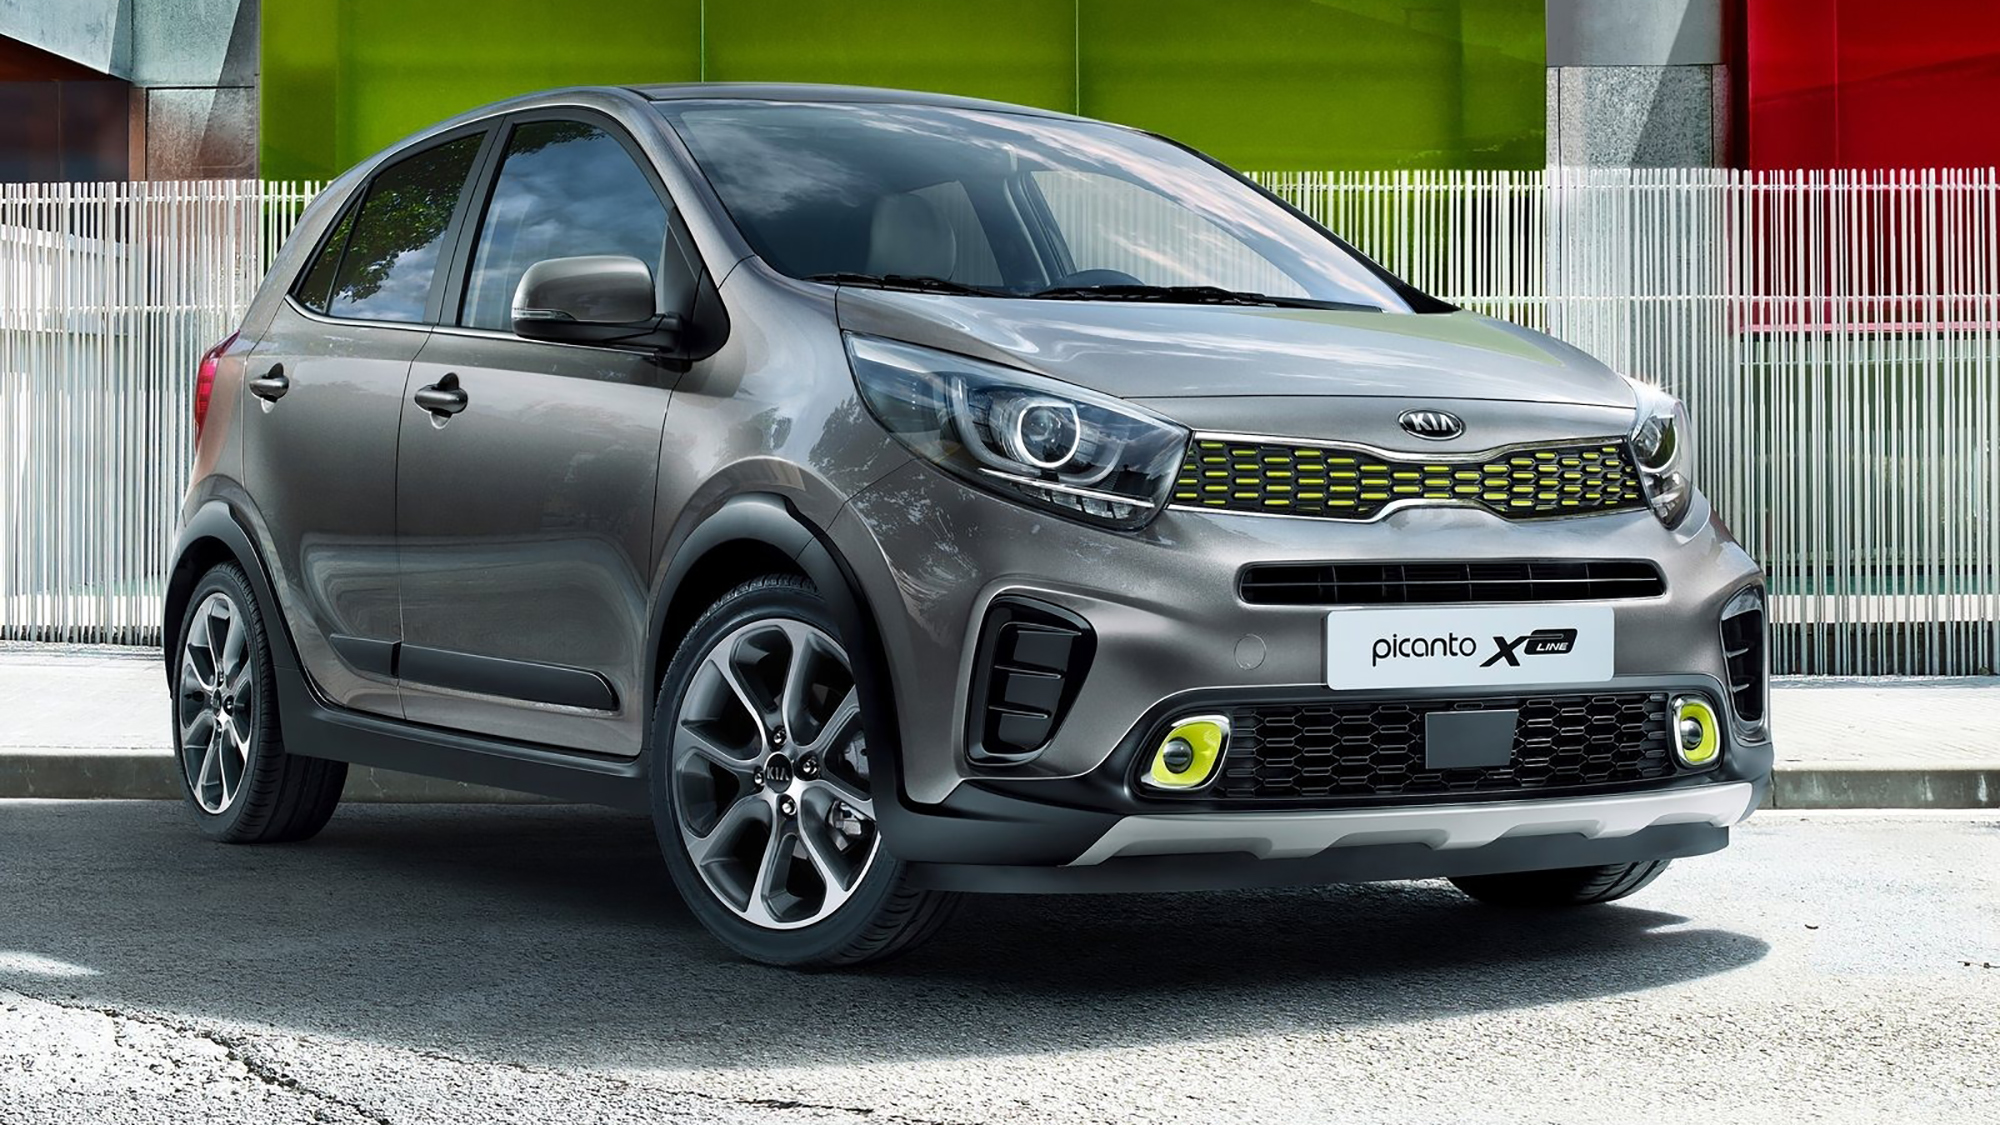 Kia Picanto X Line Becomes Permanent Gt Line Manual On The Cards Caradvice